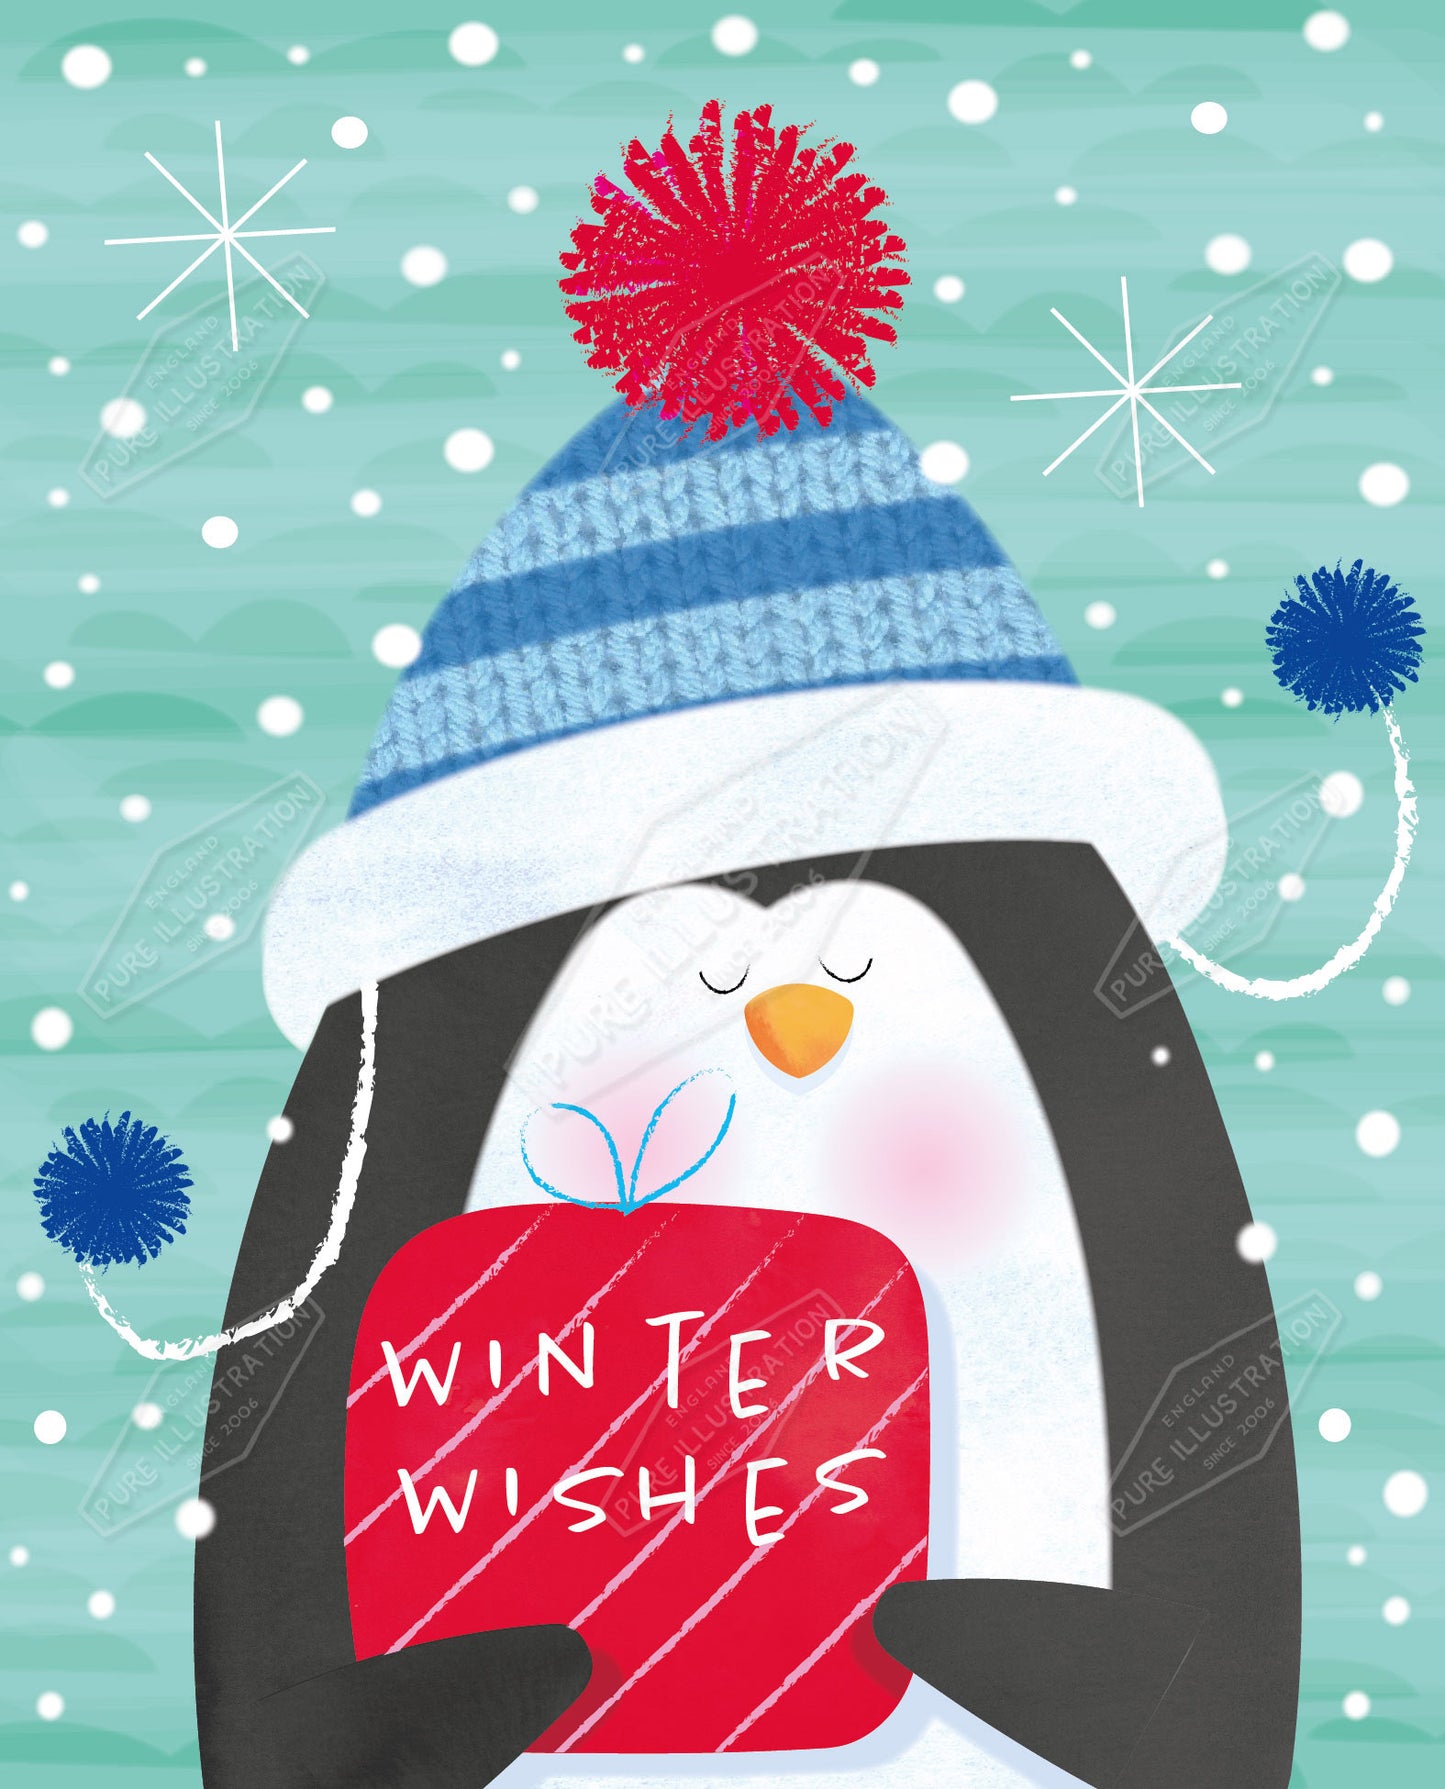 00035488SPI- Sarah Pitt is represented by Pure Art Licensing Agency - Christmas Greeting Card Design